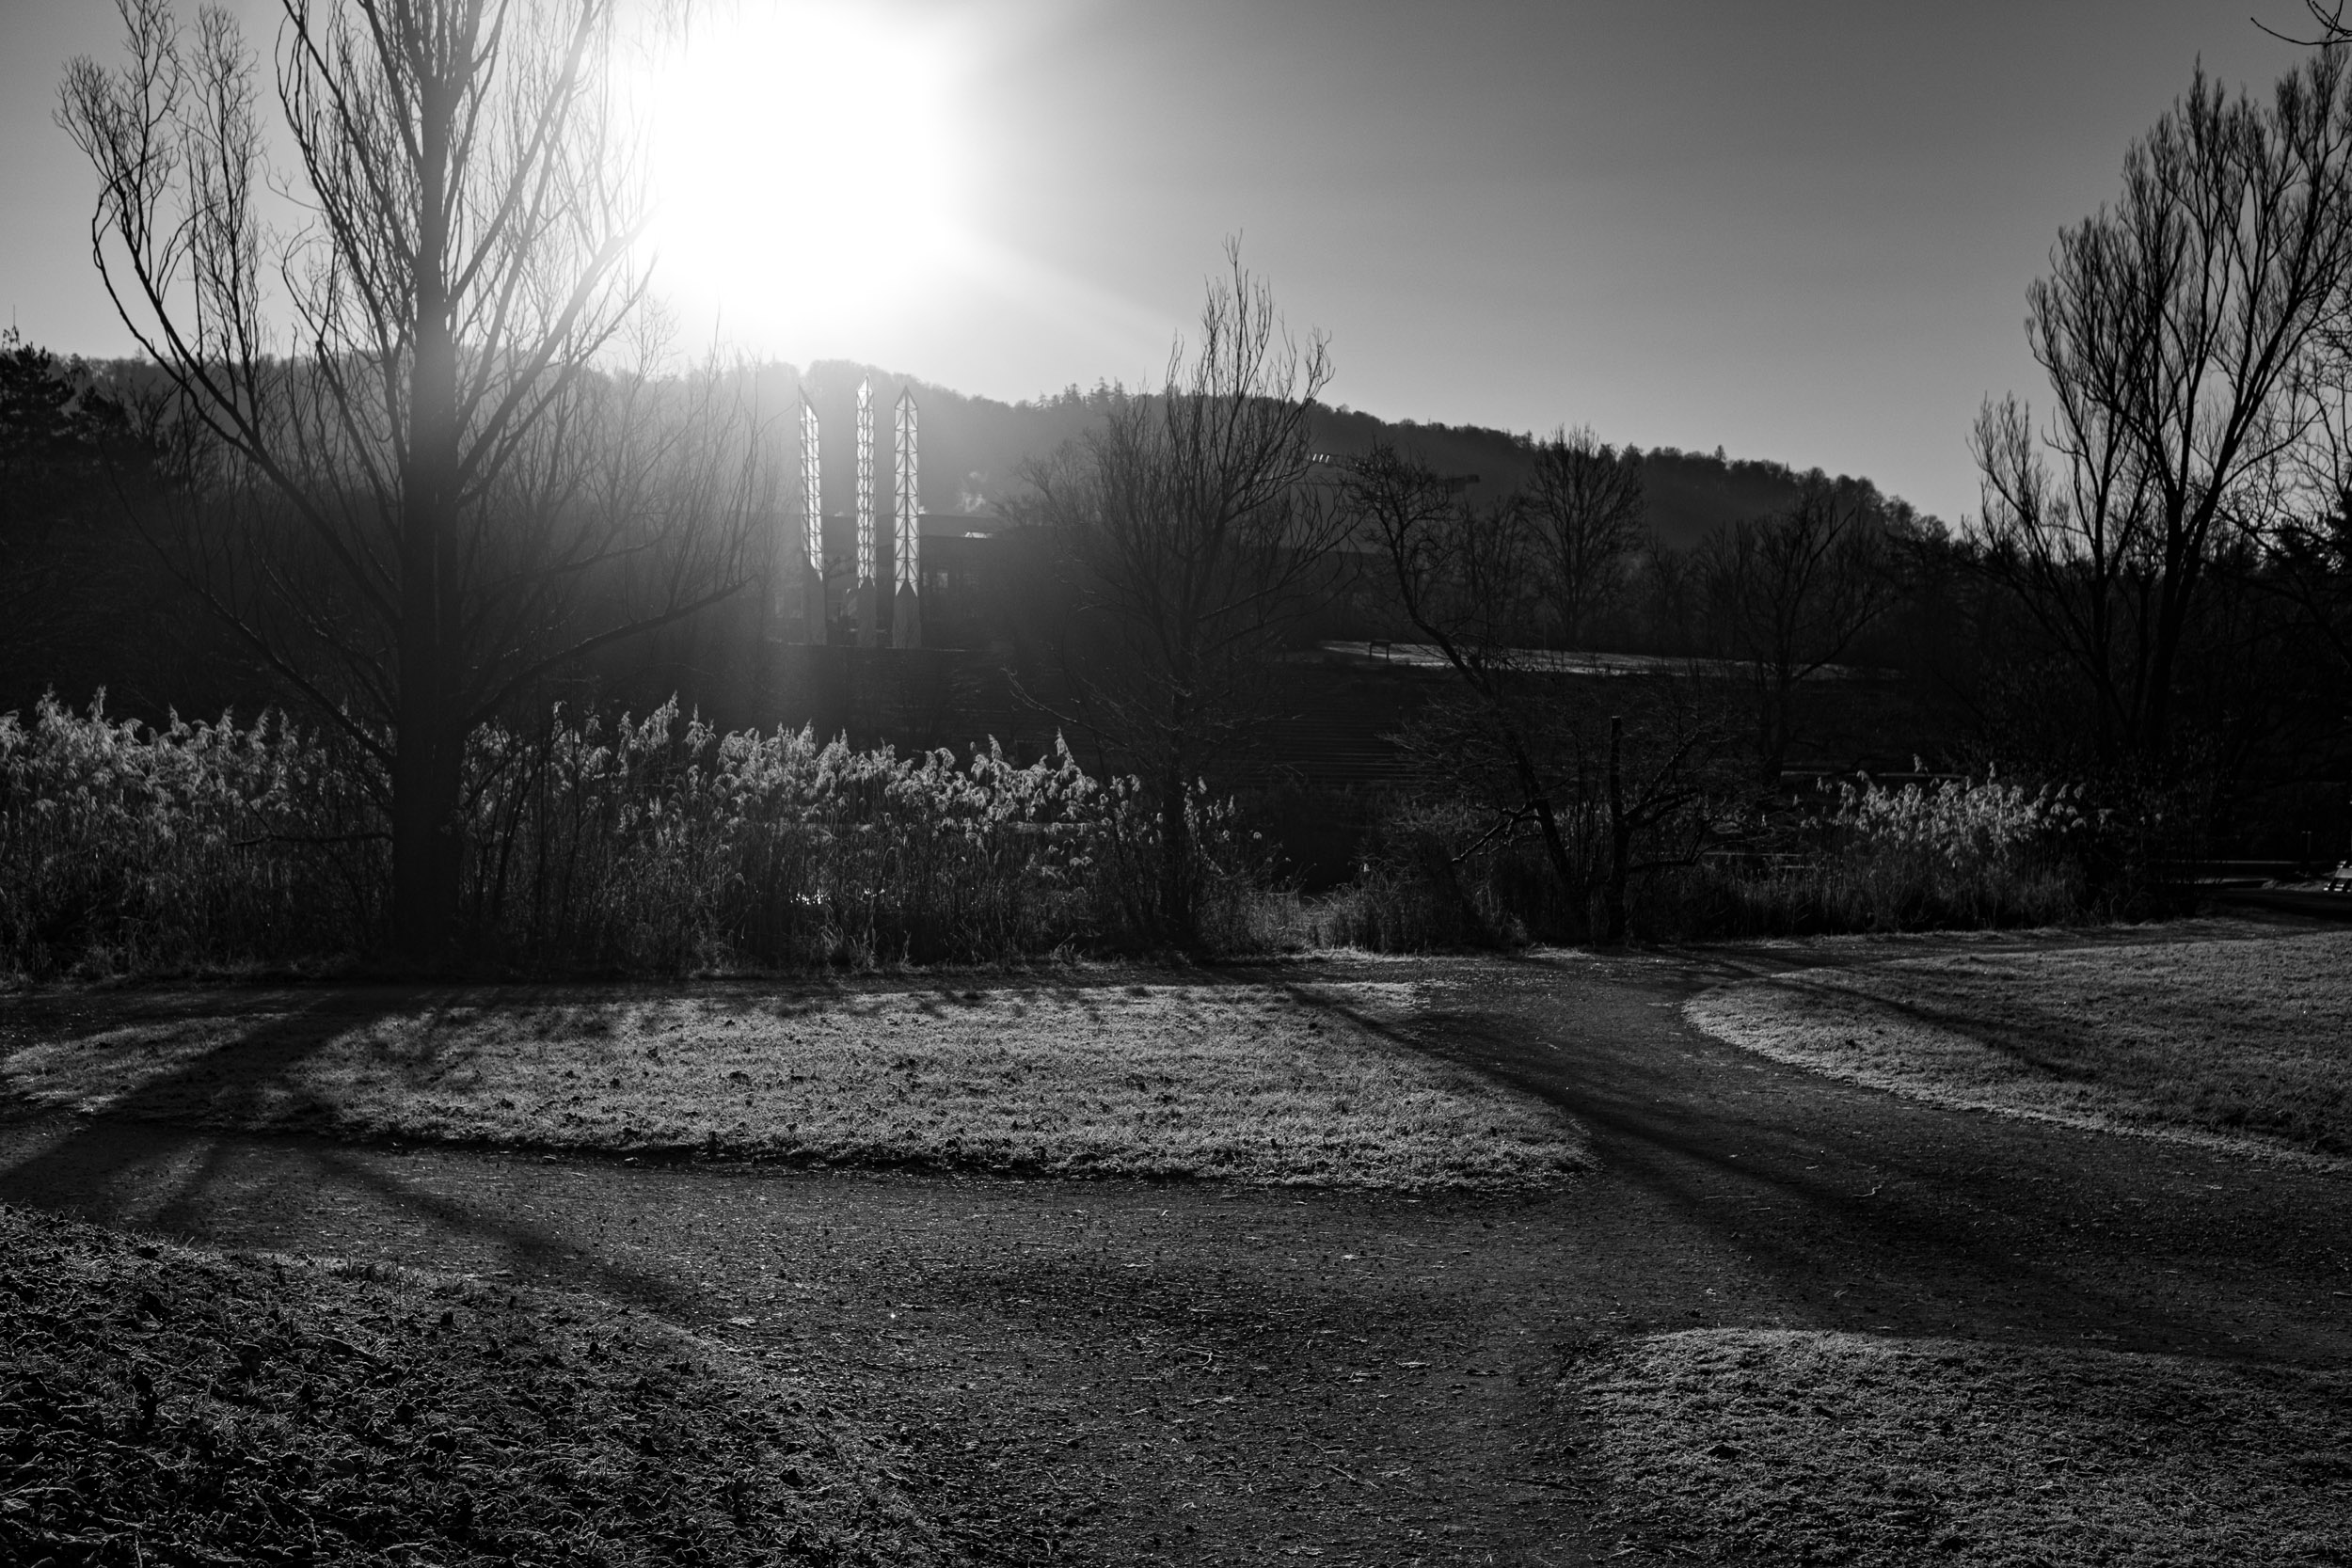 Sun rising on a frosty morning in the Irchelpark, Zurich.